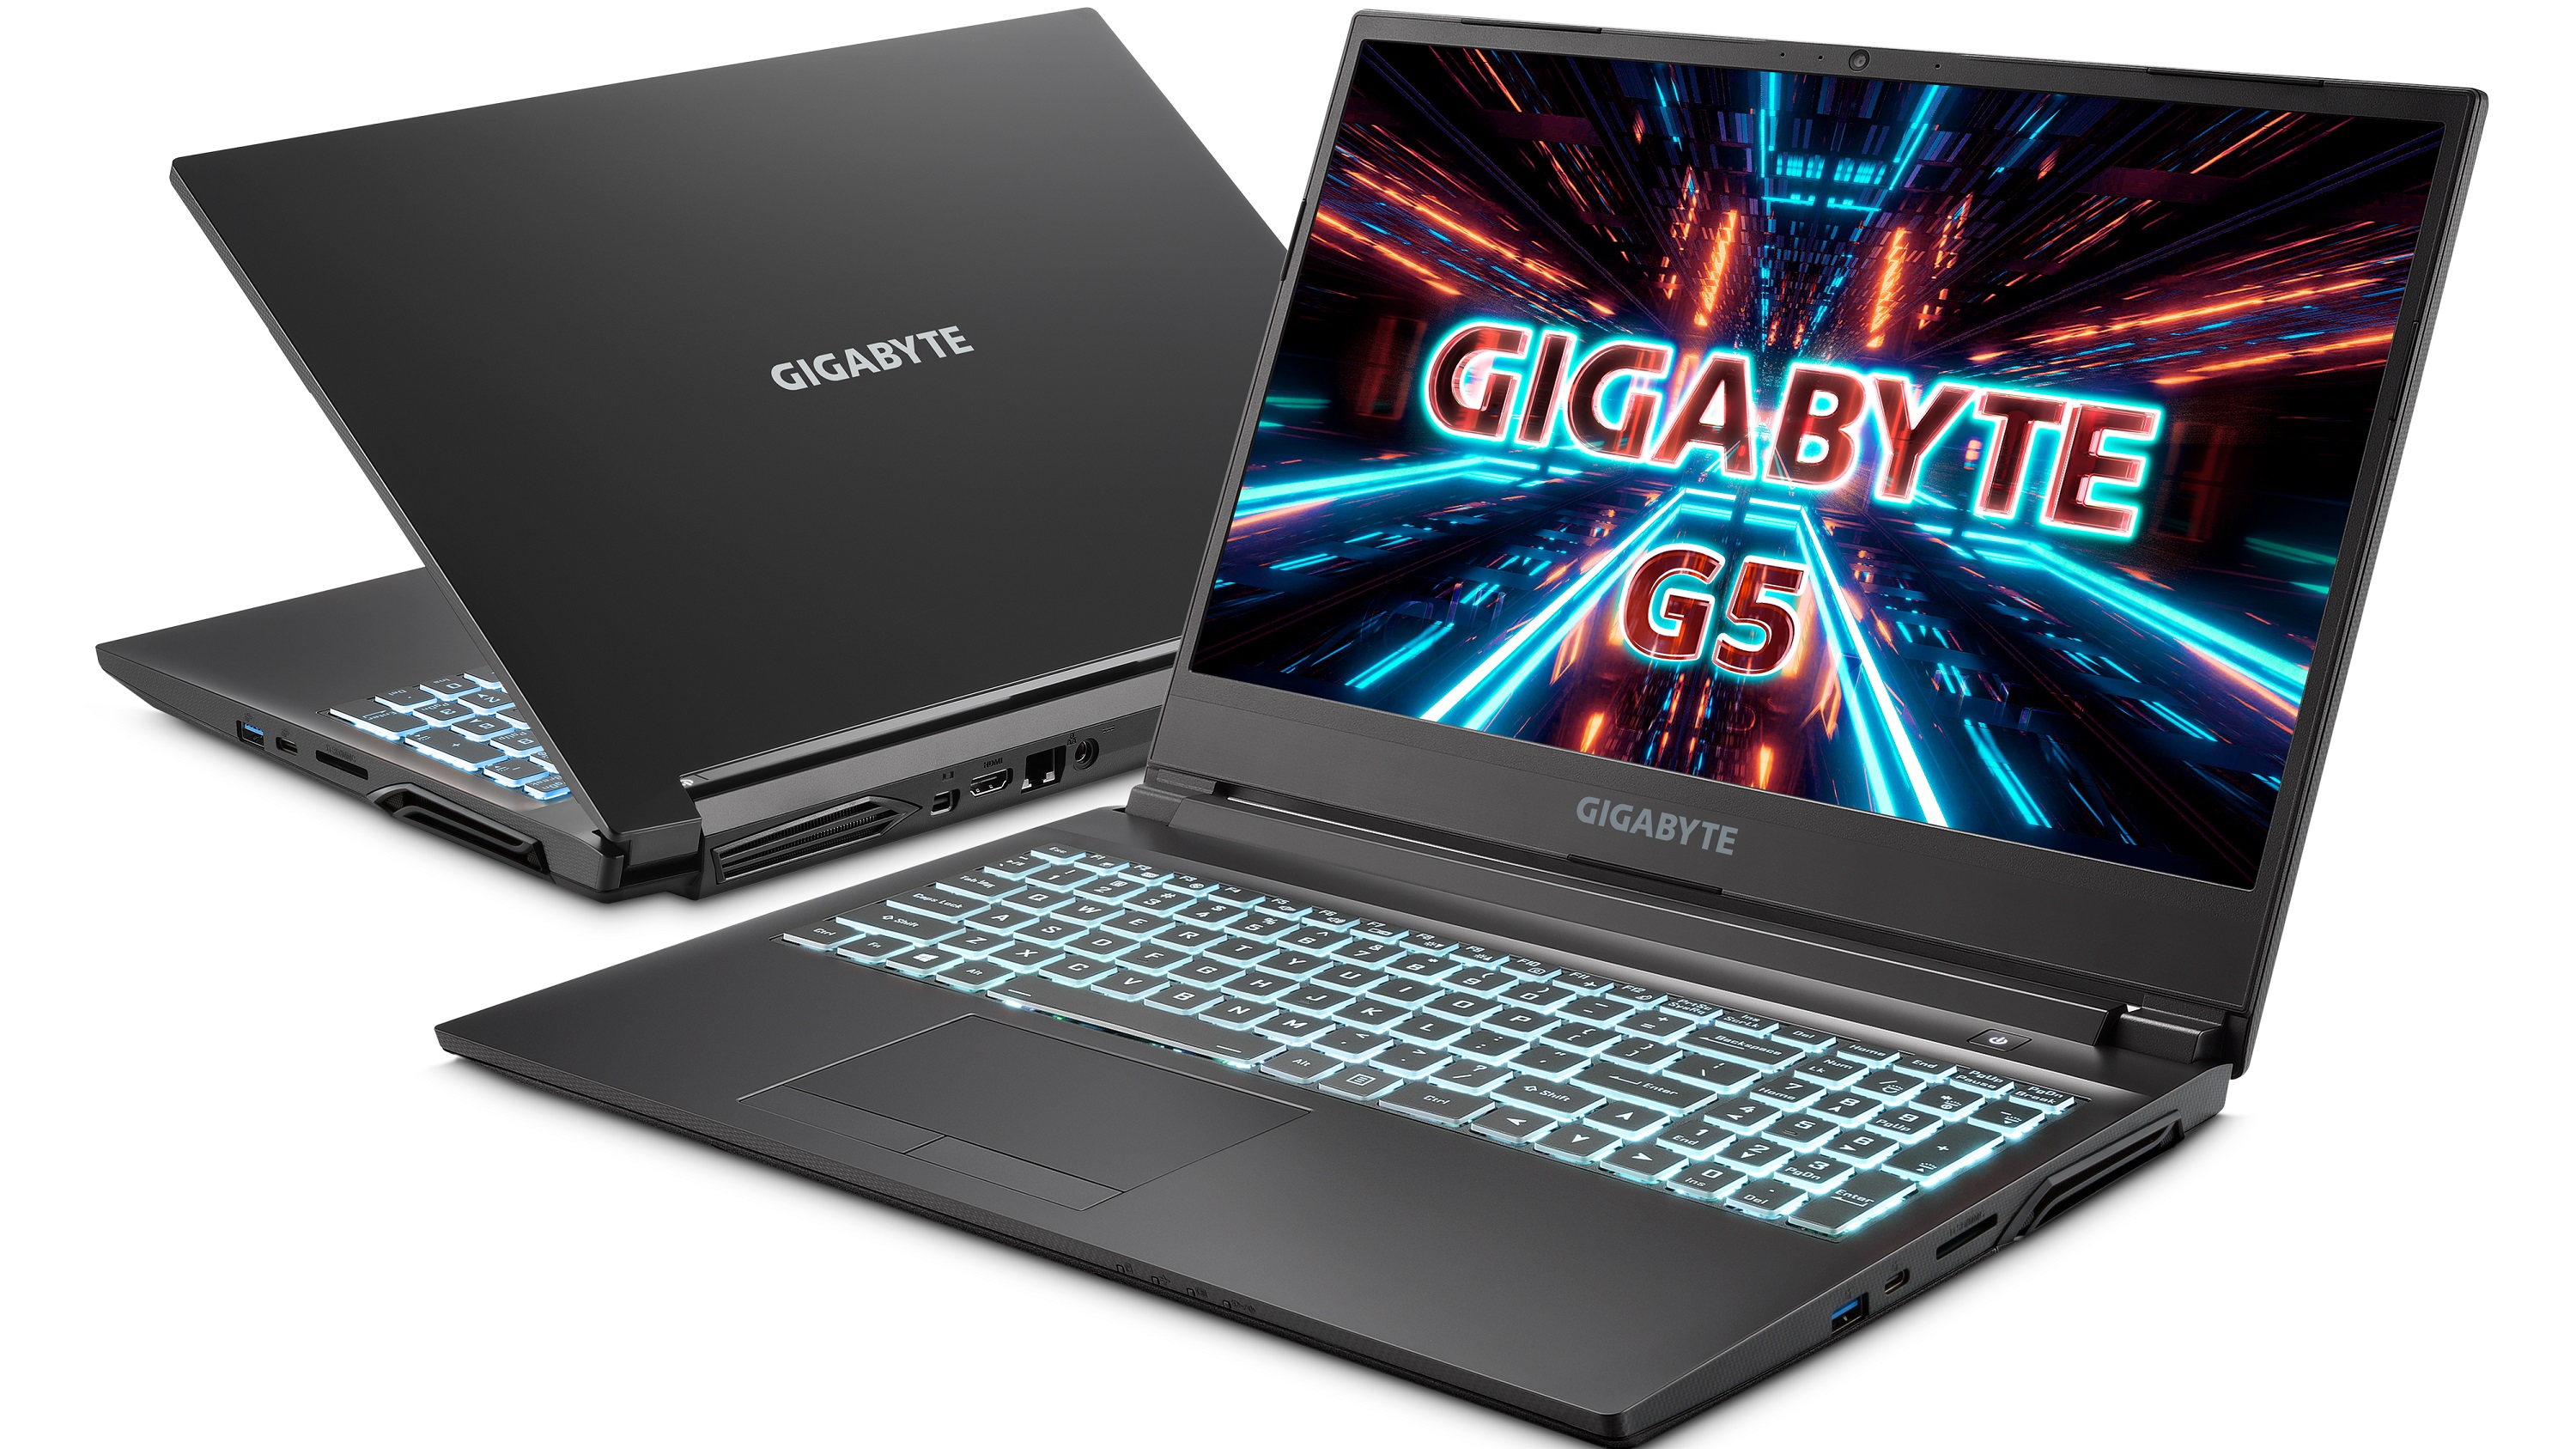 The latest Gigabyte laptops offer a lot of power and something for everyone